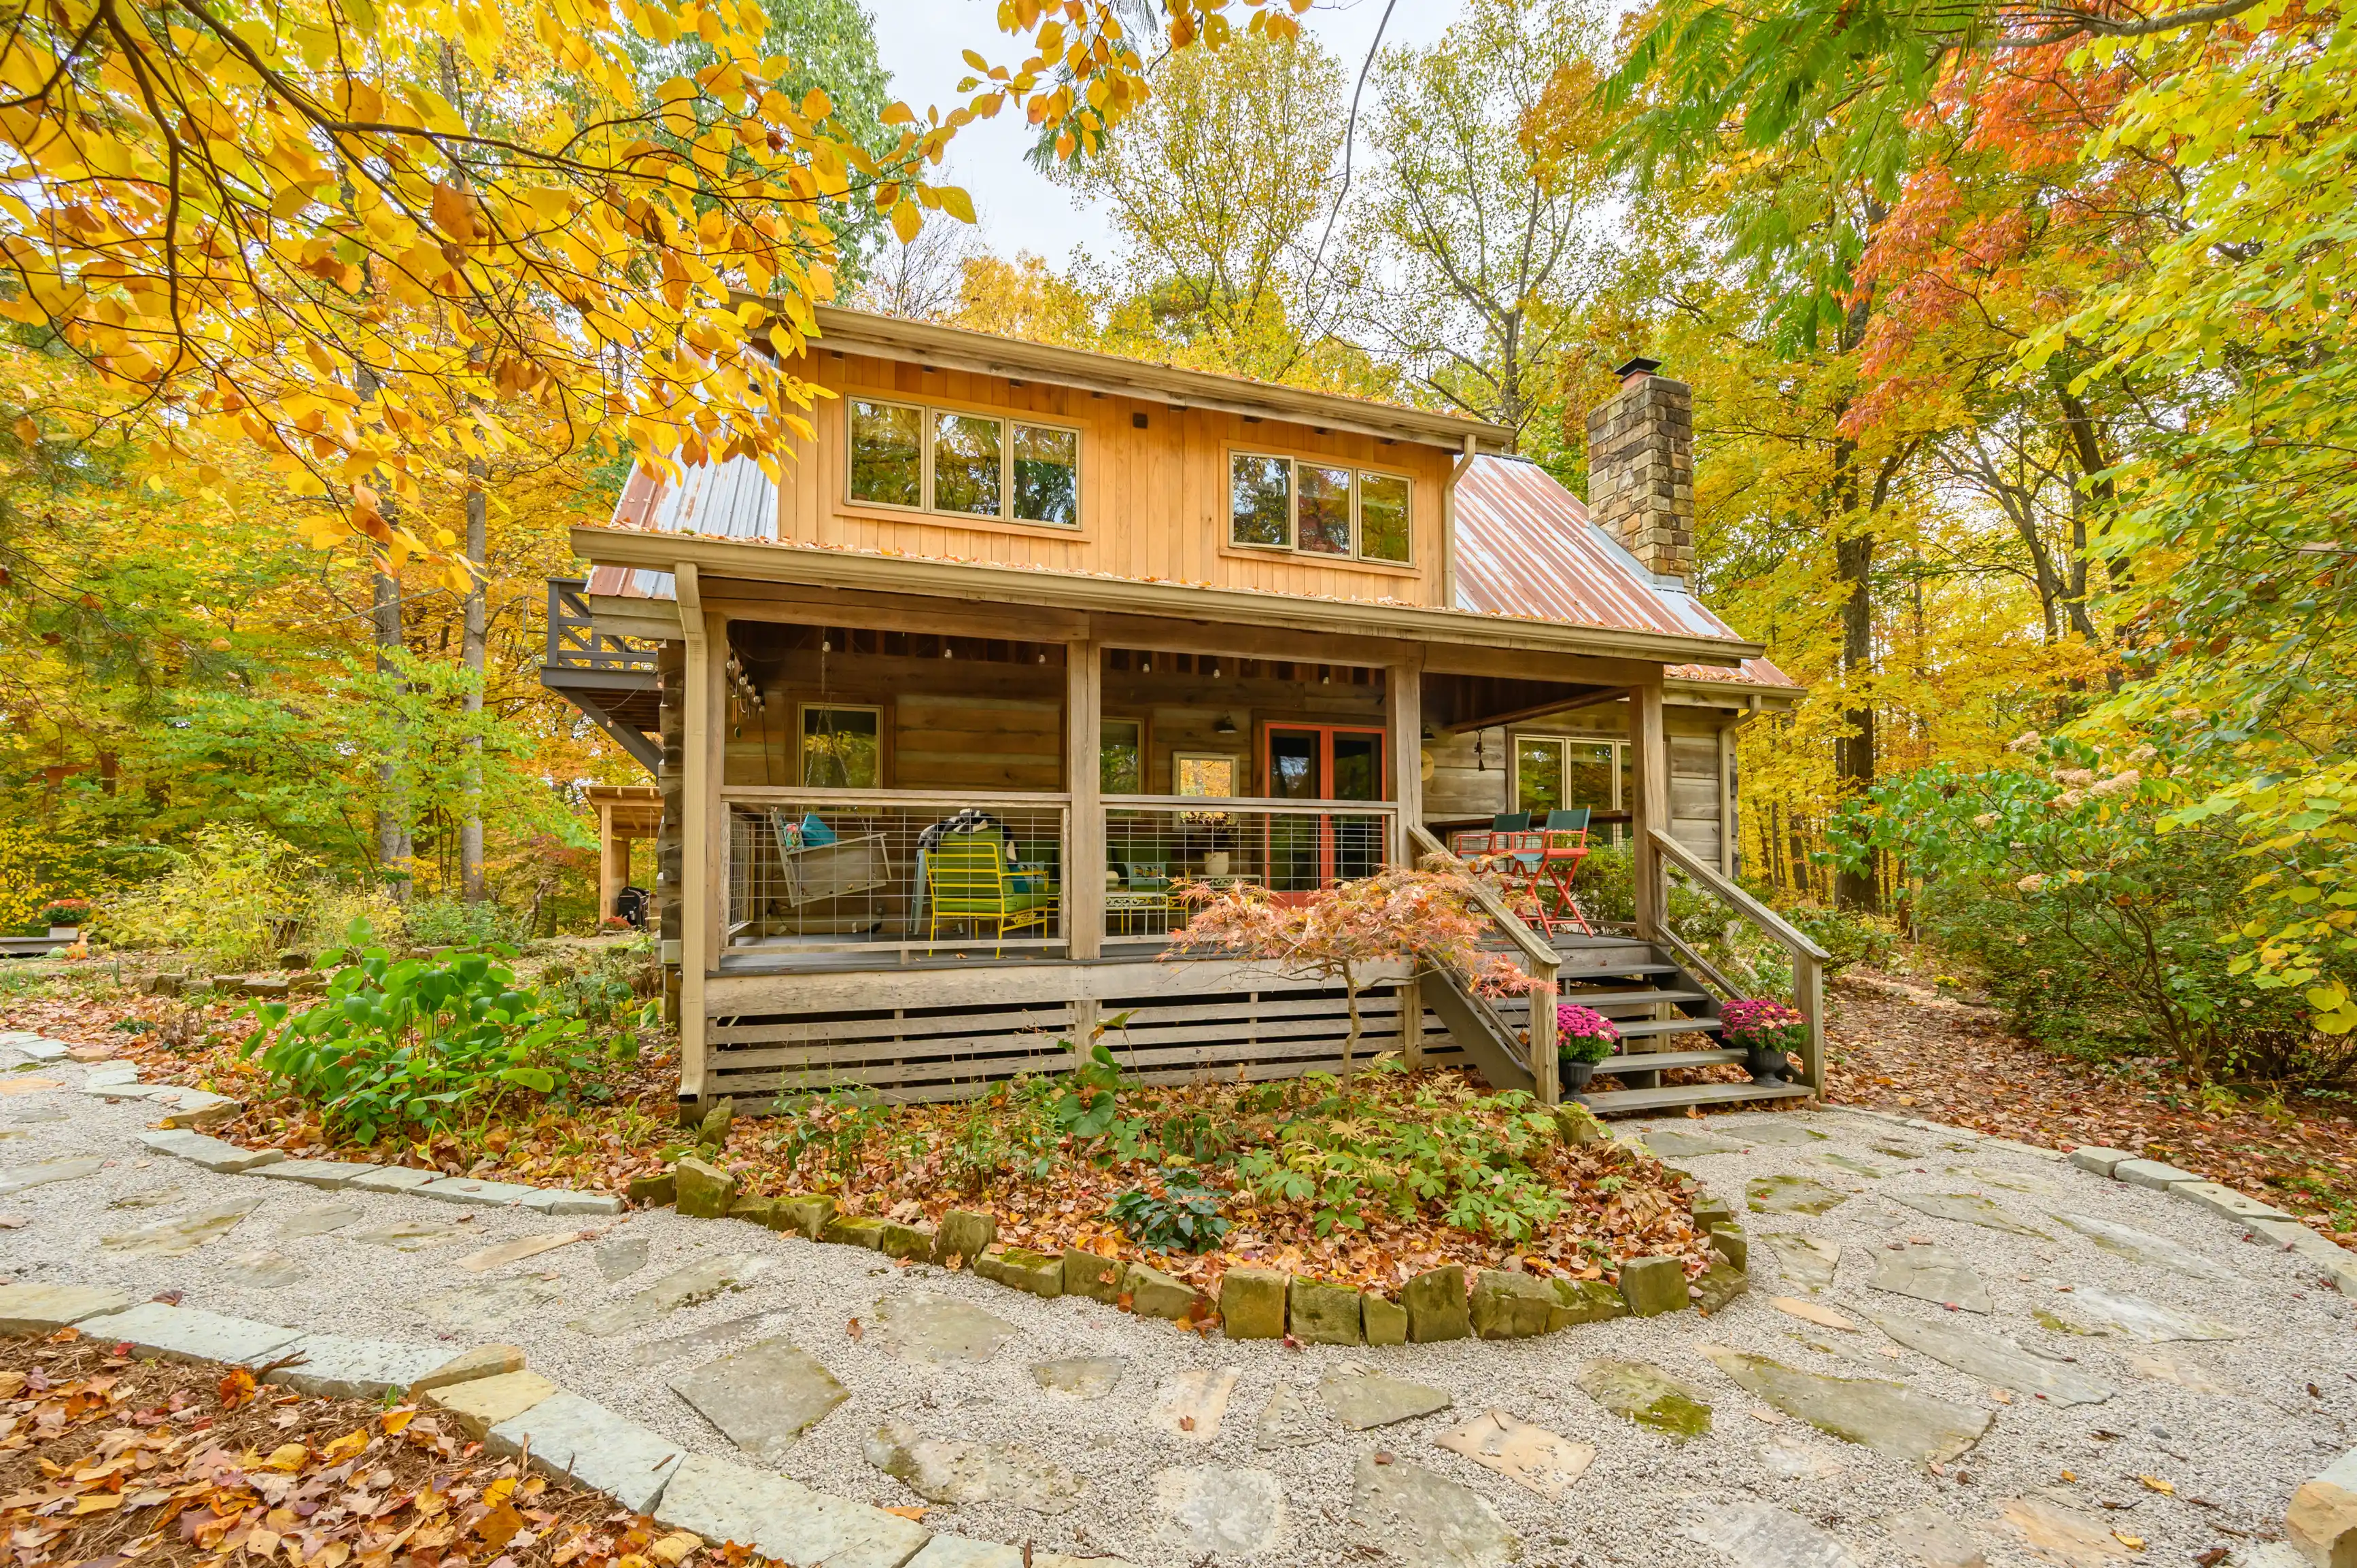 Quaint wooden cabin with a red tin roof surrounded by colorful fall foliage, featuring a front porch with a stone pathway.